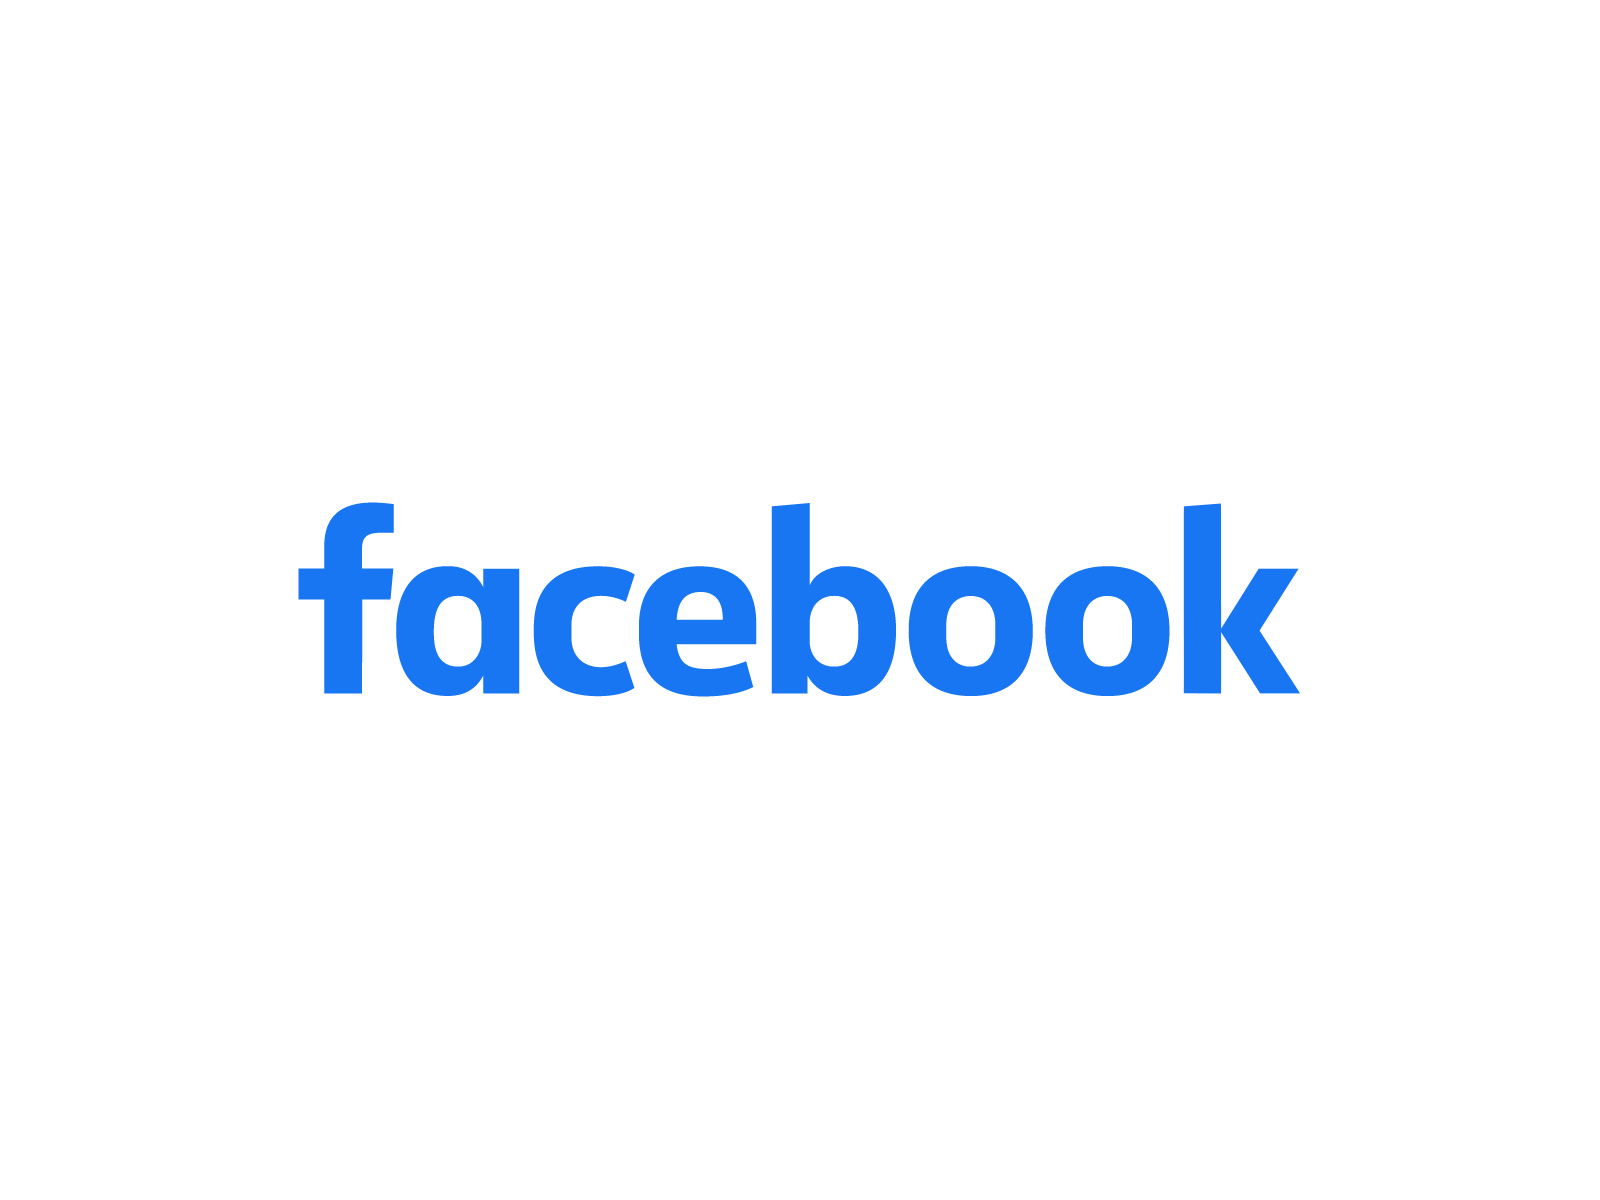 Facebook Logo Animation by Quang Nguyen on Dribbble